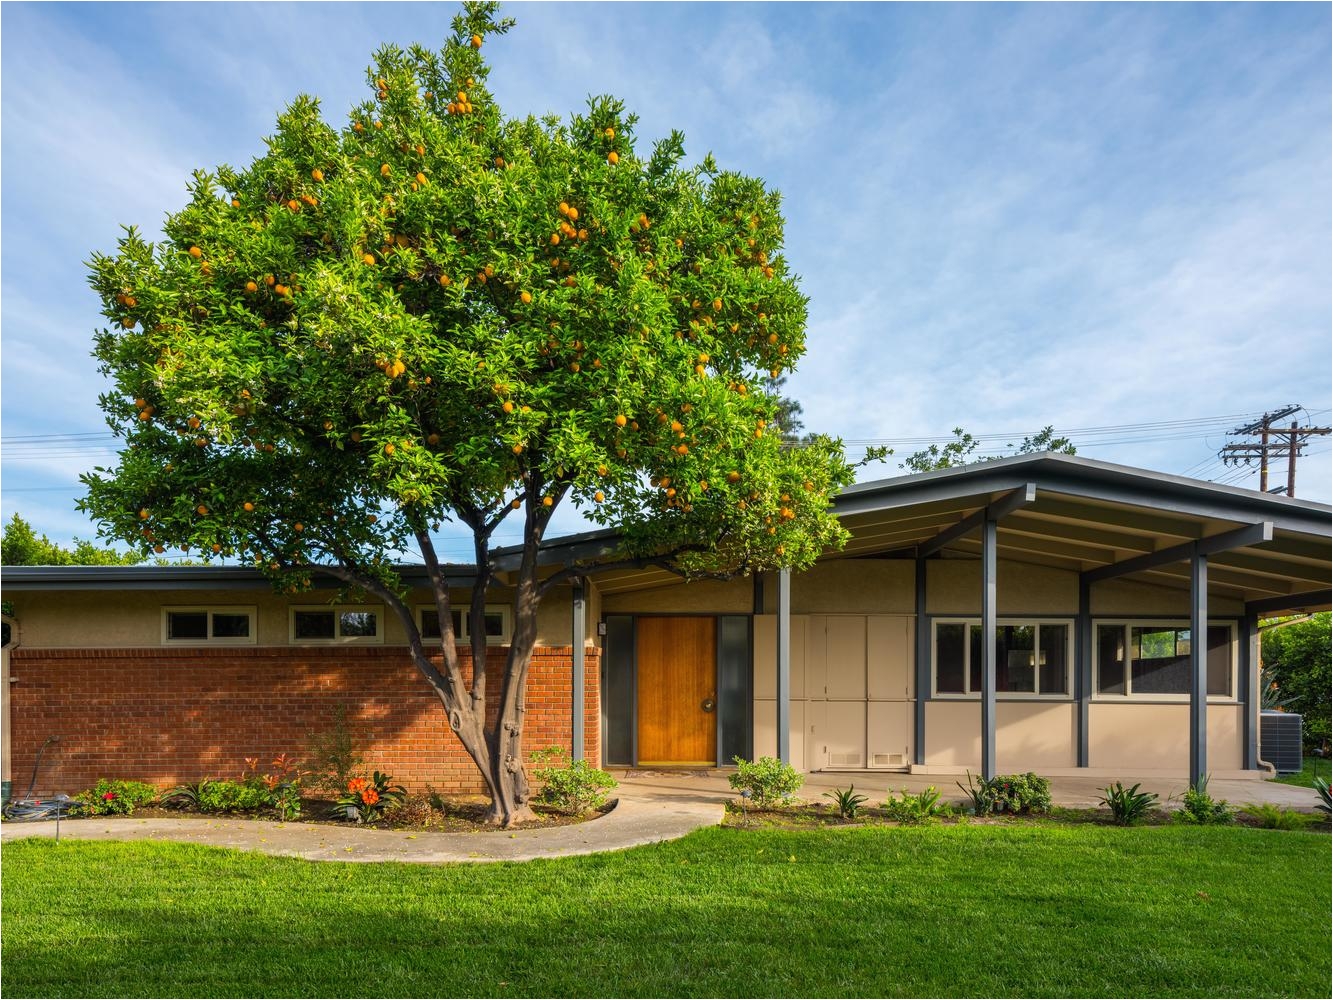 classic 1950s modern in the valley asks 775k